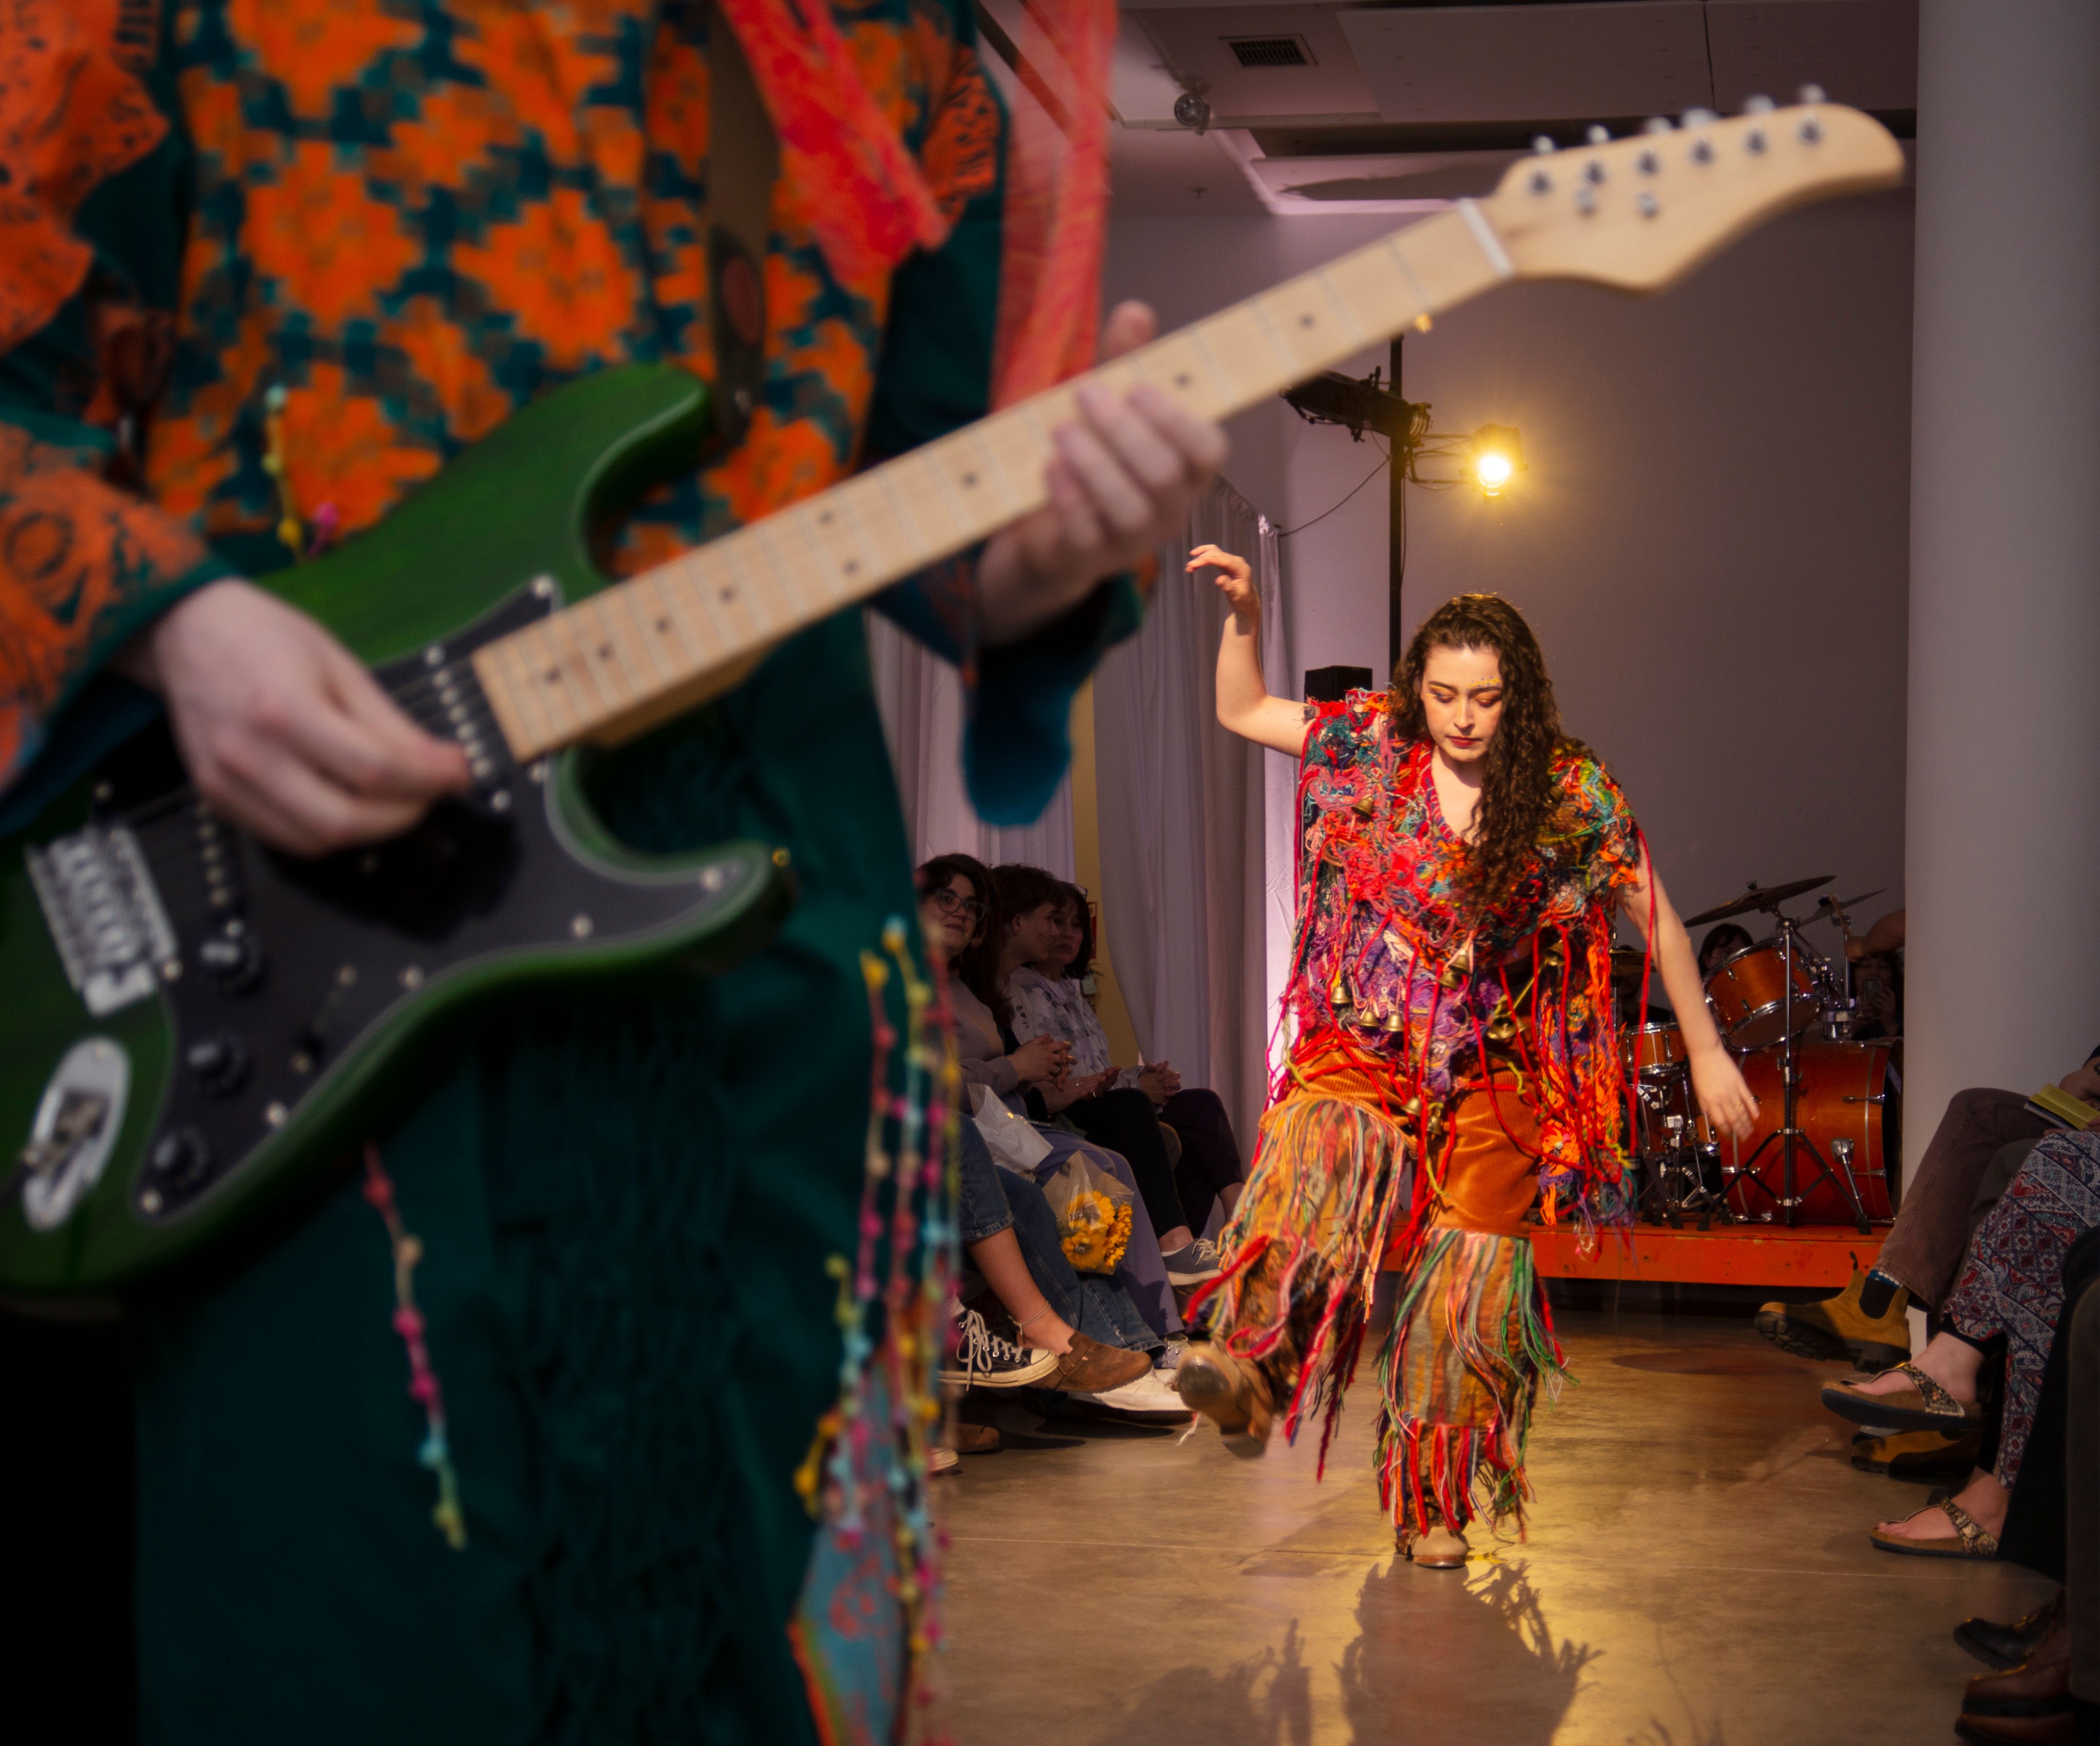 Two models wearing hippie-inspired garments, one is dancing while the other plays guitar.